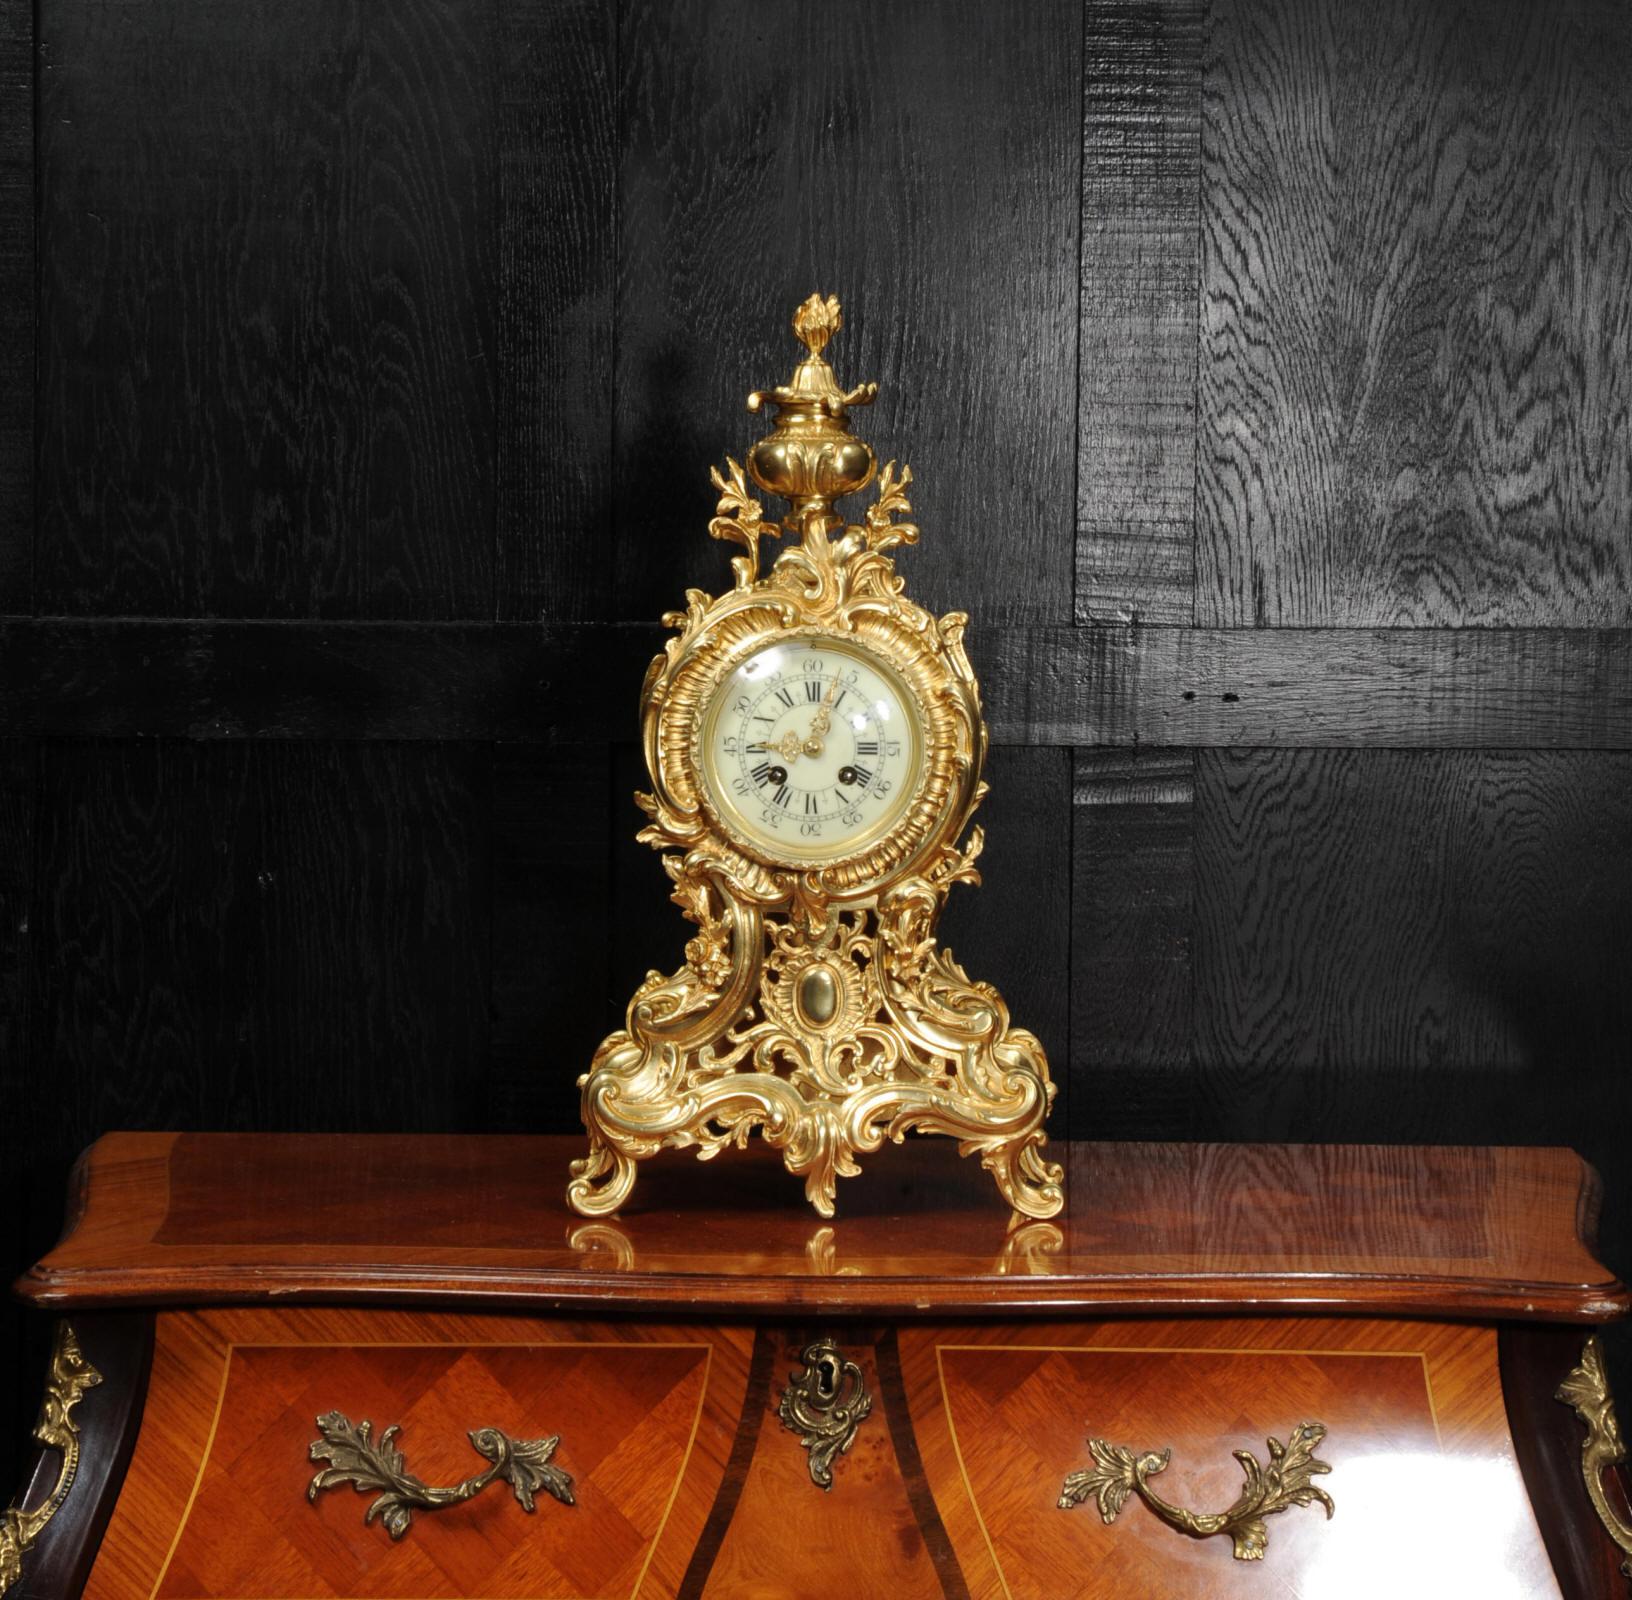 A large, superb and very decorative original antique French clock dating from circa 1900. It is boldly modelled in the Rococo style in finely gilded bronze. Waisted shaped case, decorated profusely with acanthus leaves and 'C' scrolls. The front is